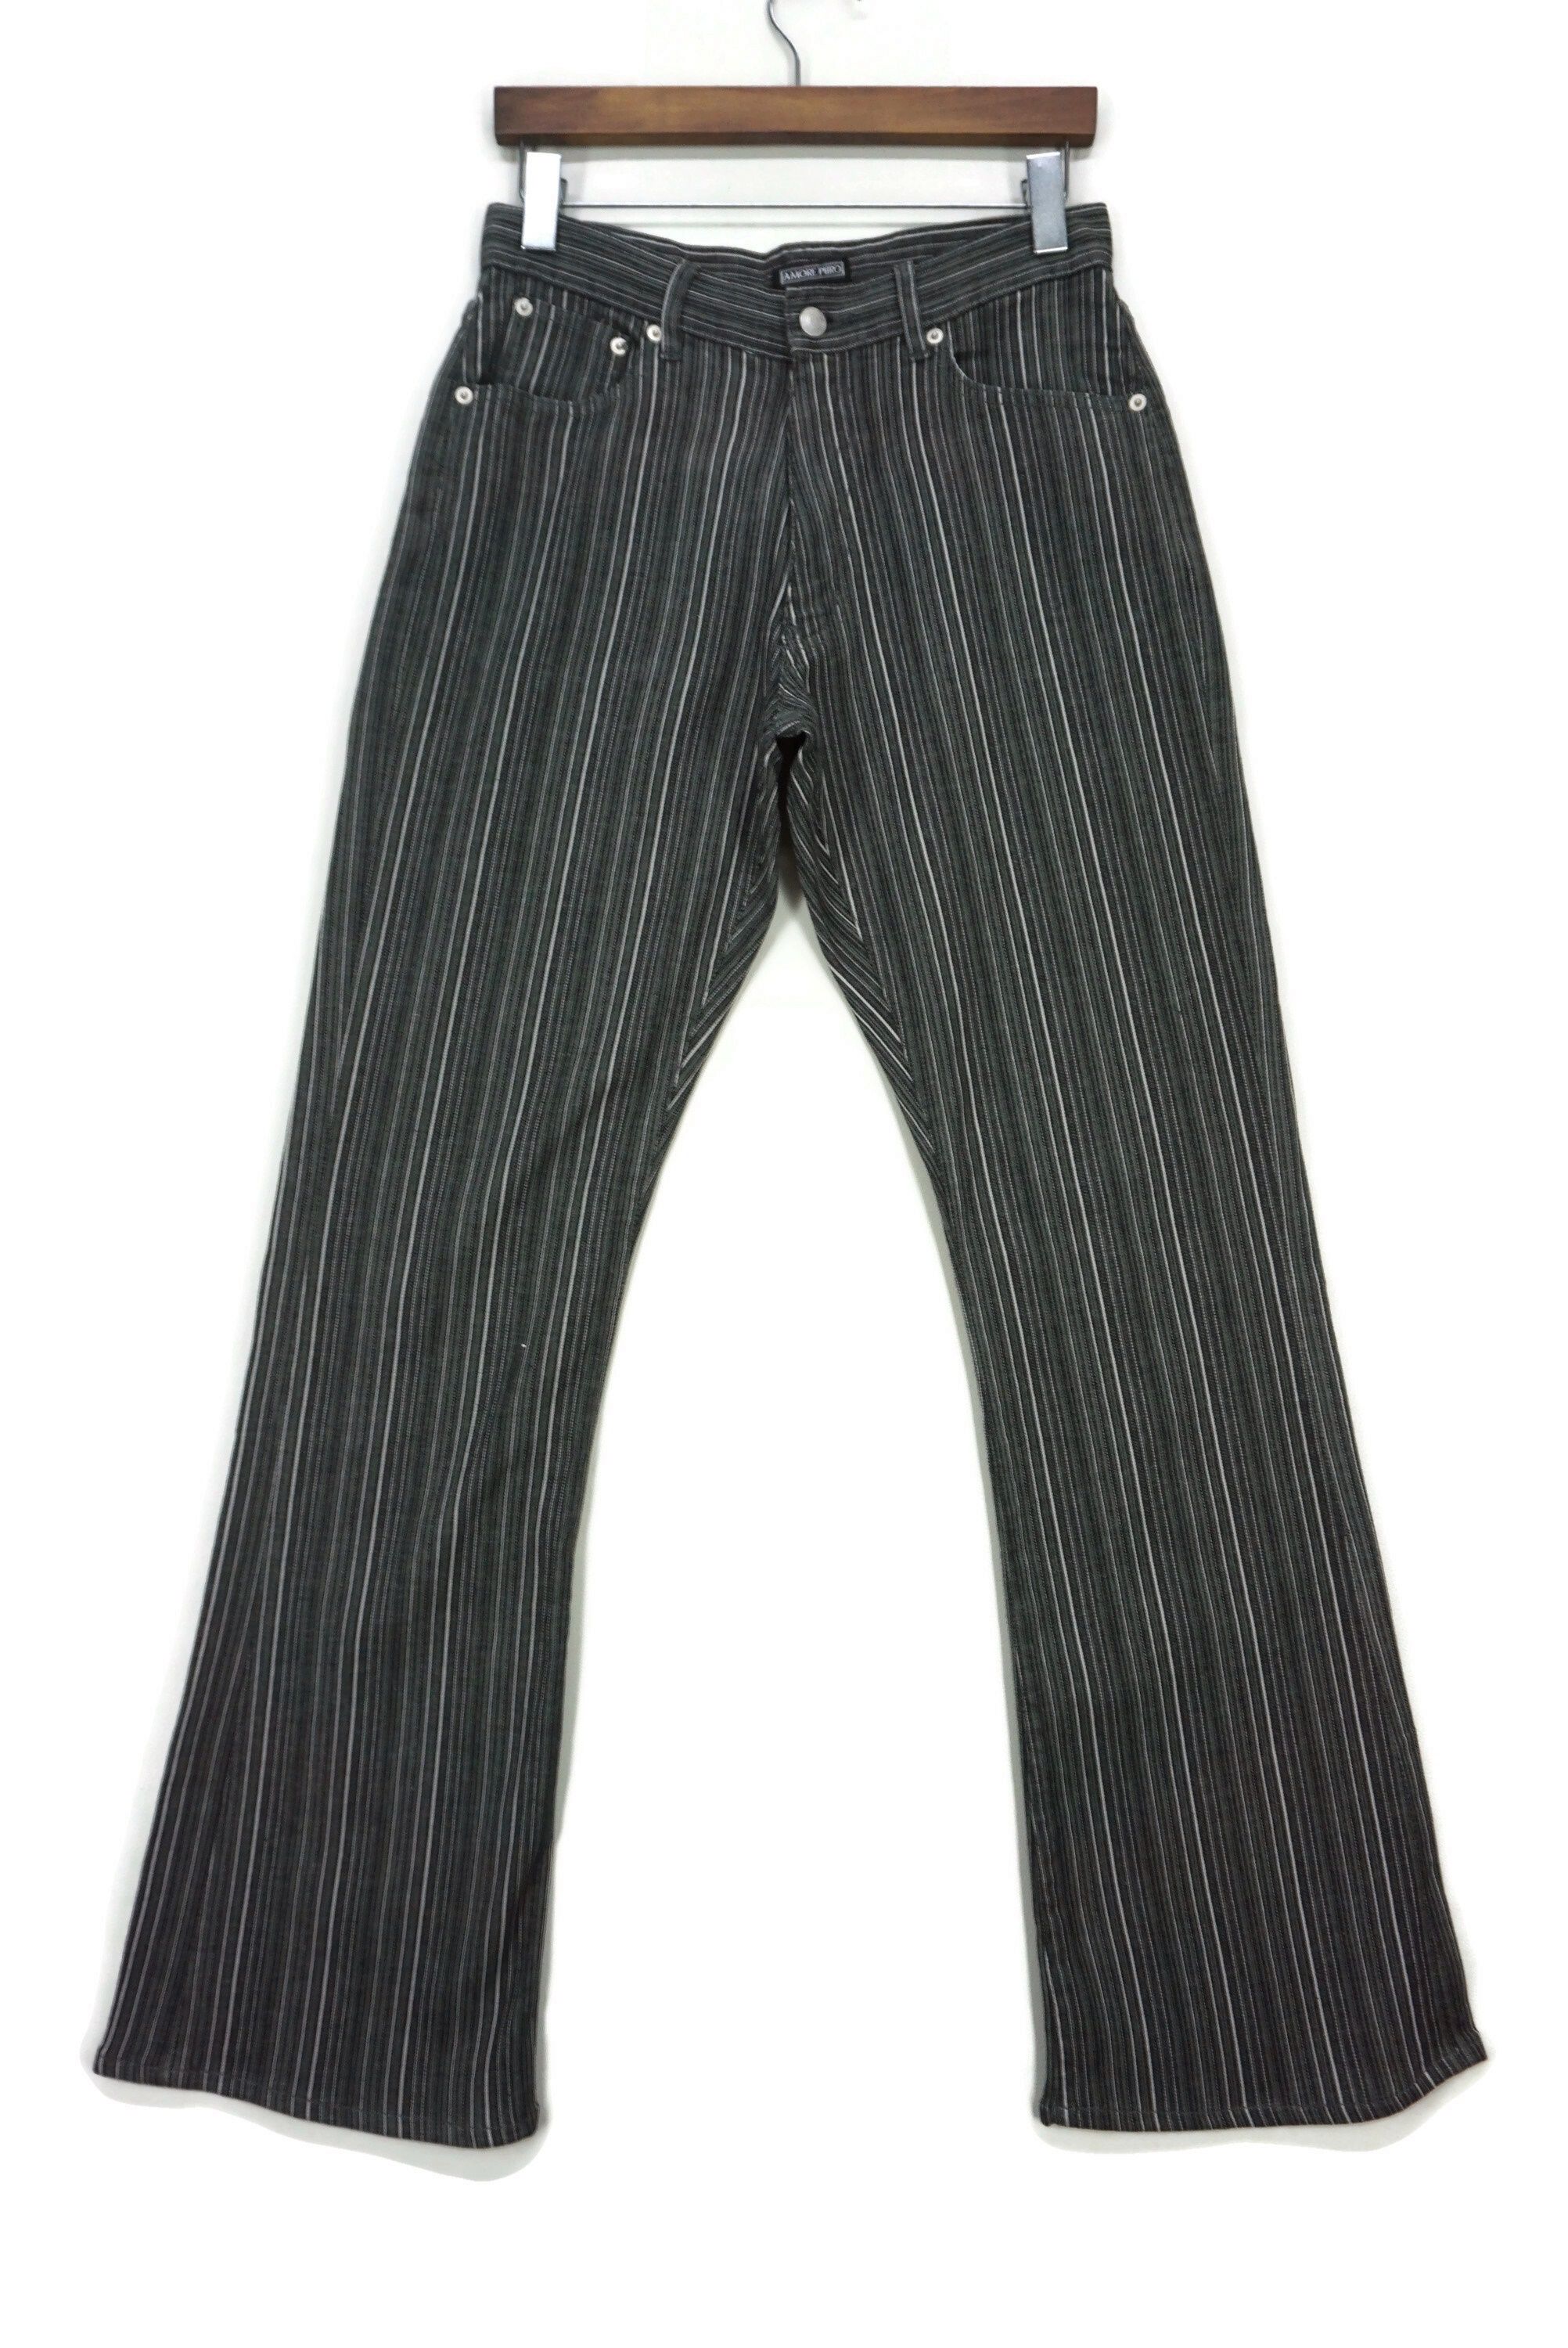 Workers Amore Puro Bootcut Hickory Jeans Stripe Flare Pants | Grailed